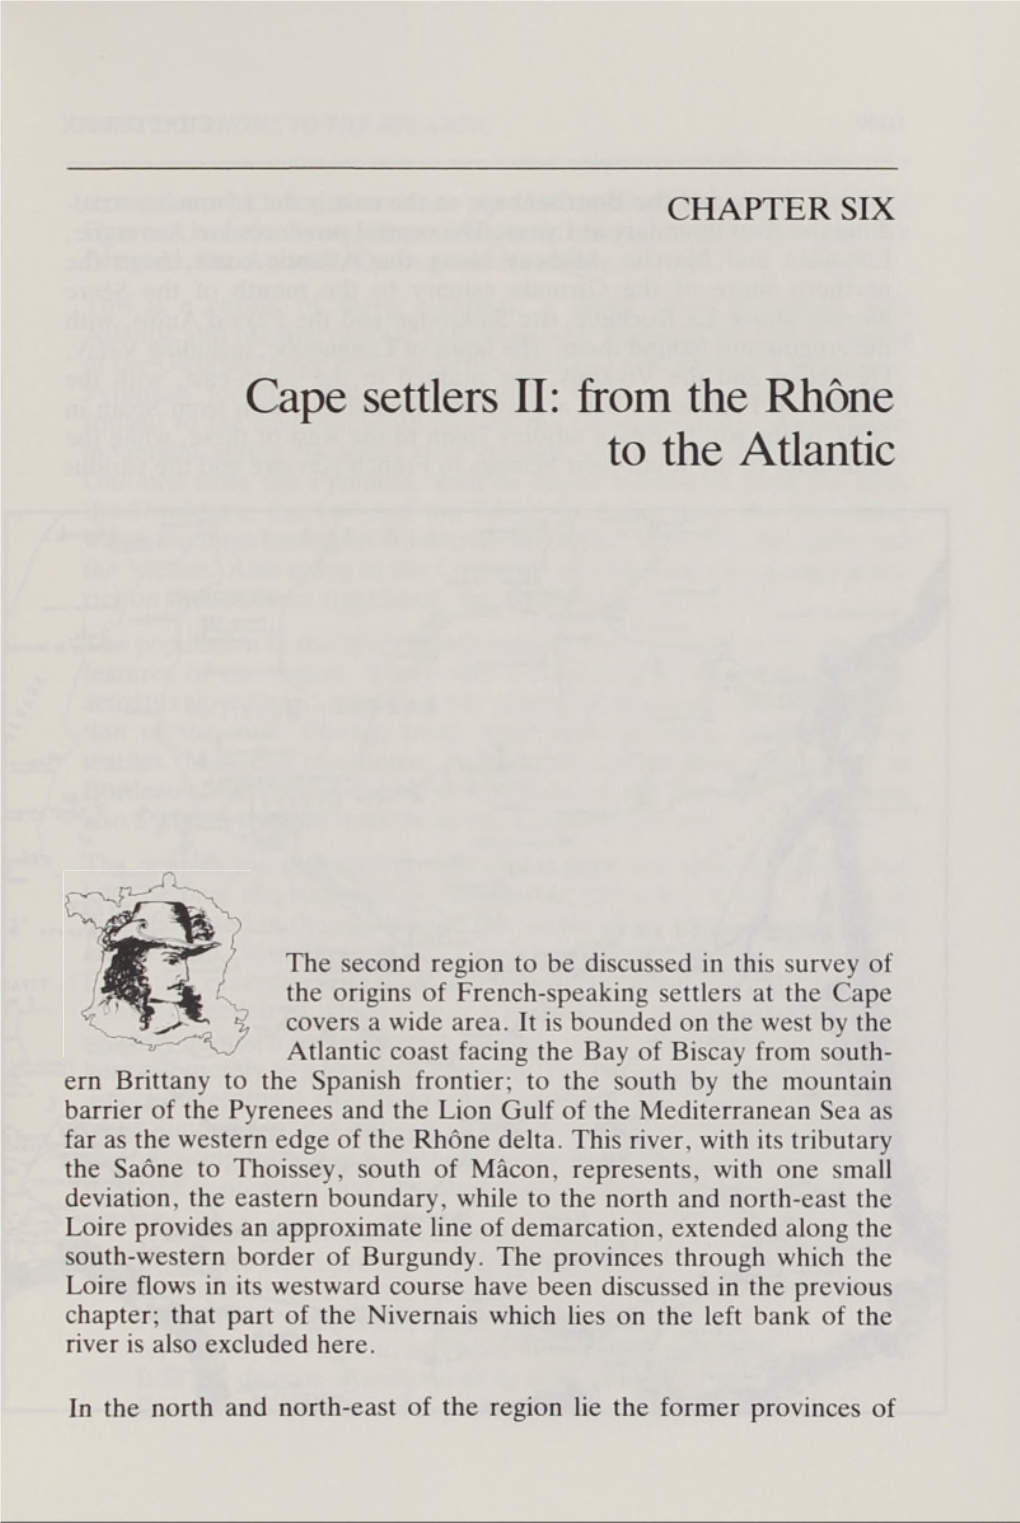 Cape Settlers II: from the Rhone to the Atlantic